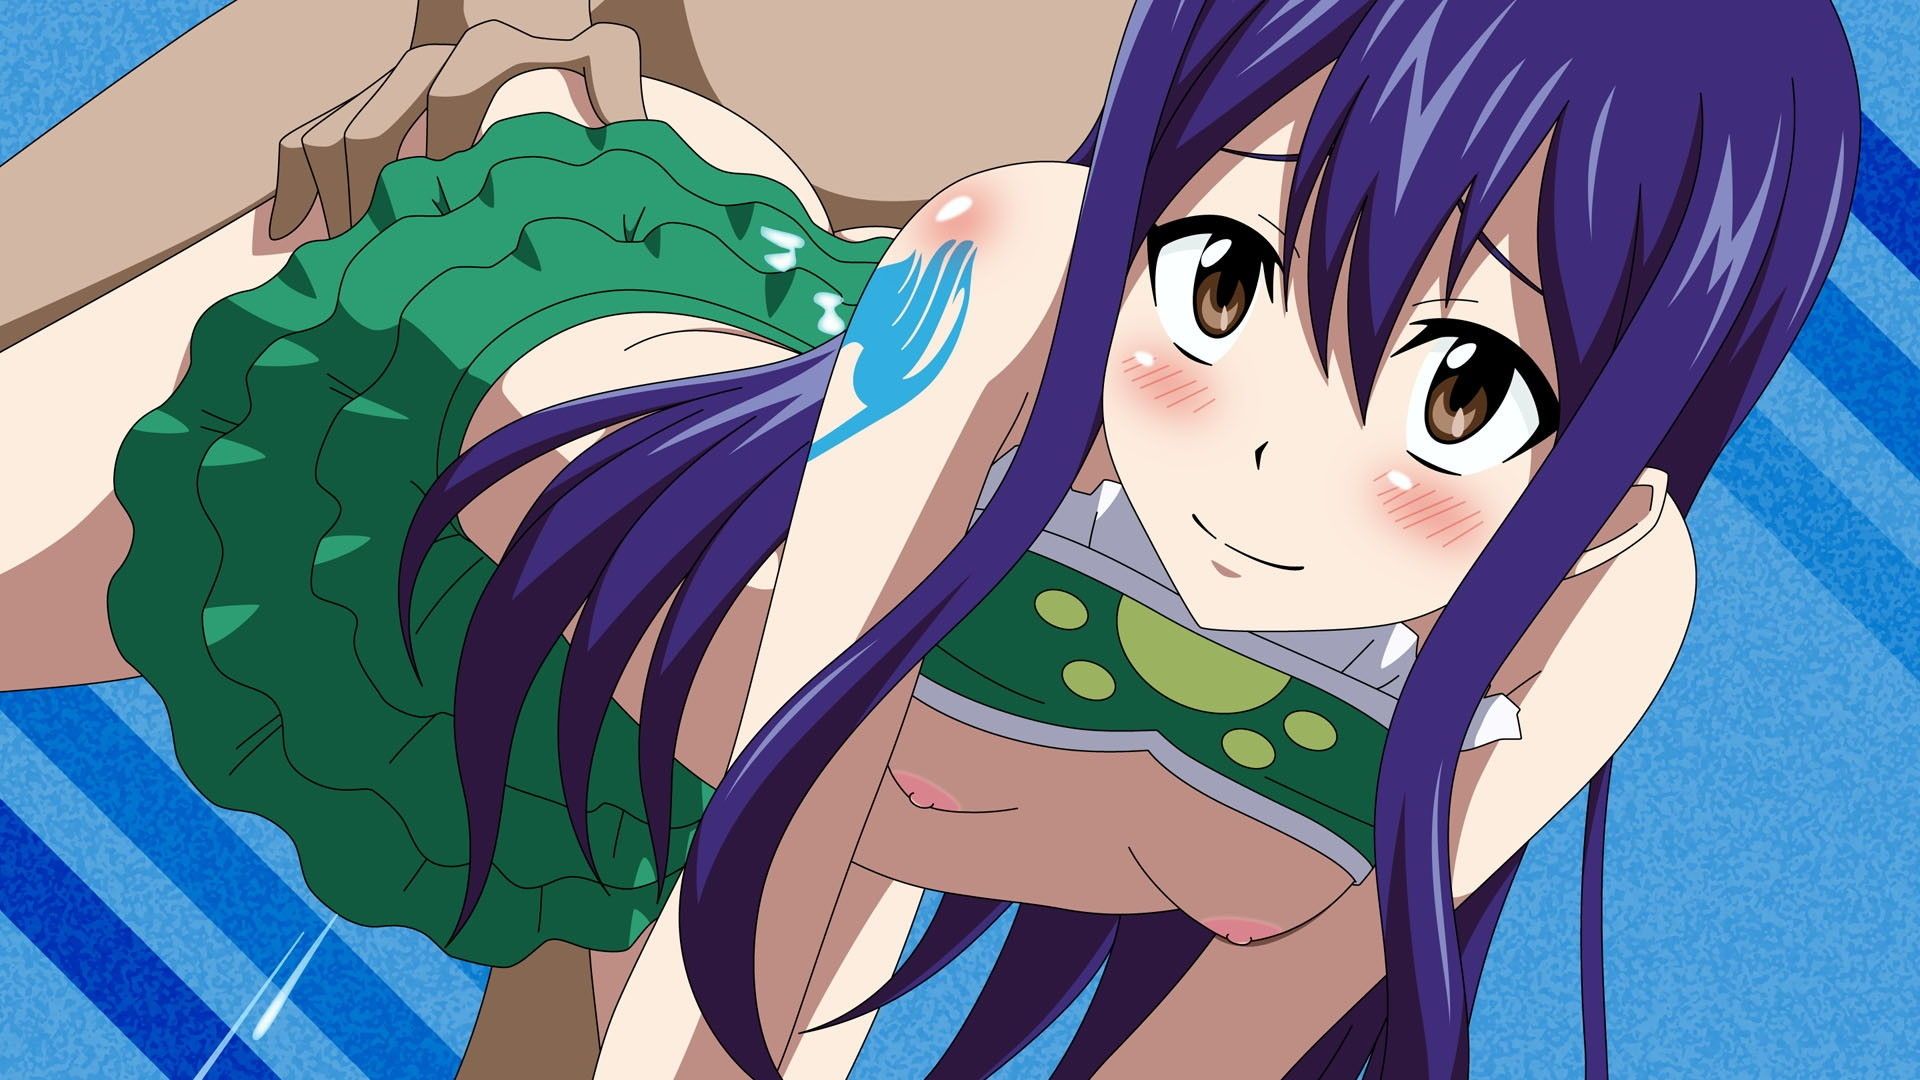 [Twinterolli] FAIRY Tail of the series also ended and Lori daughter Wendy Marvel erotic image of her? 38